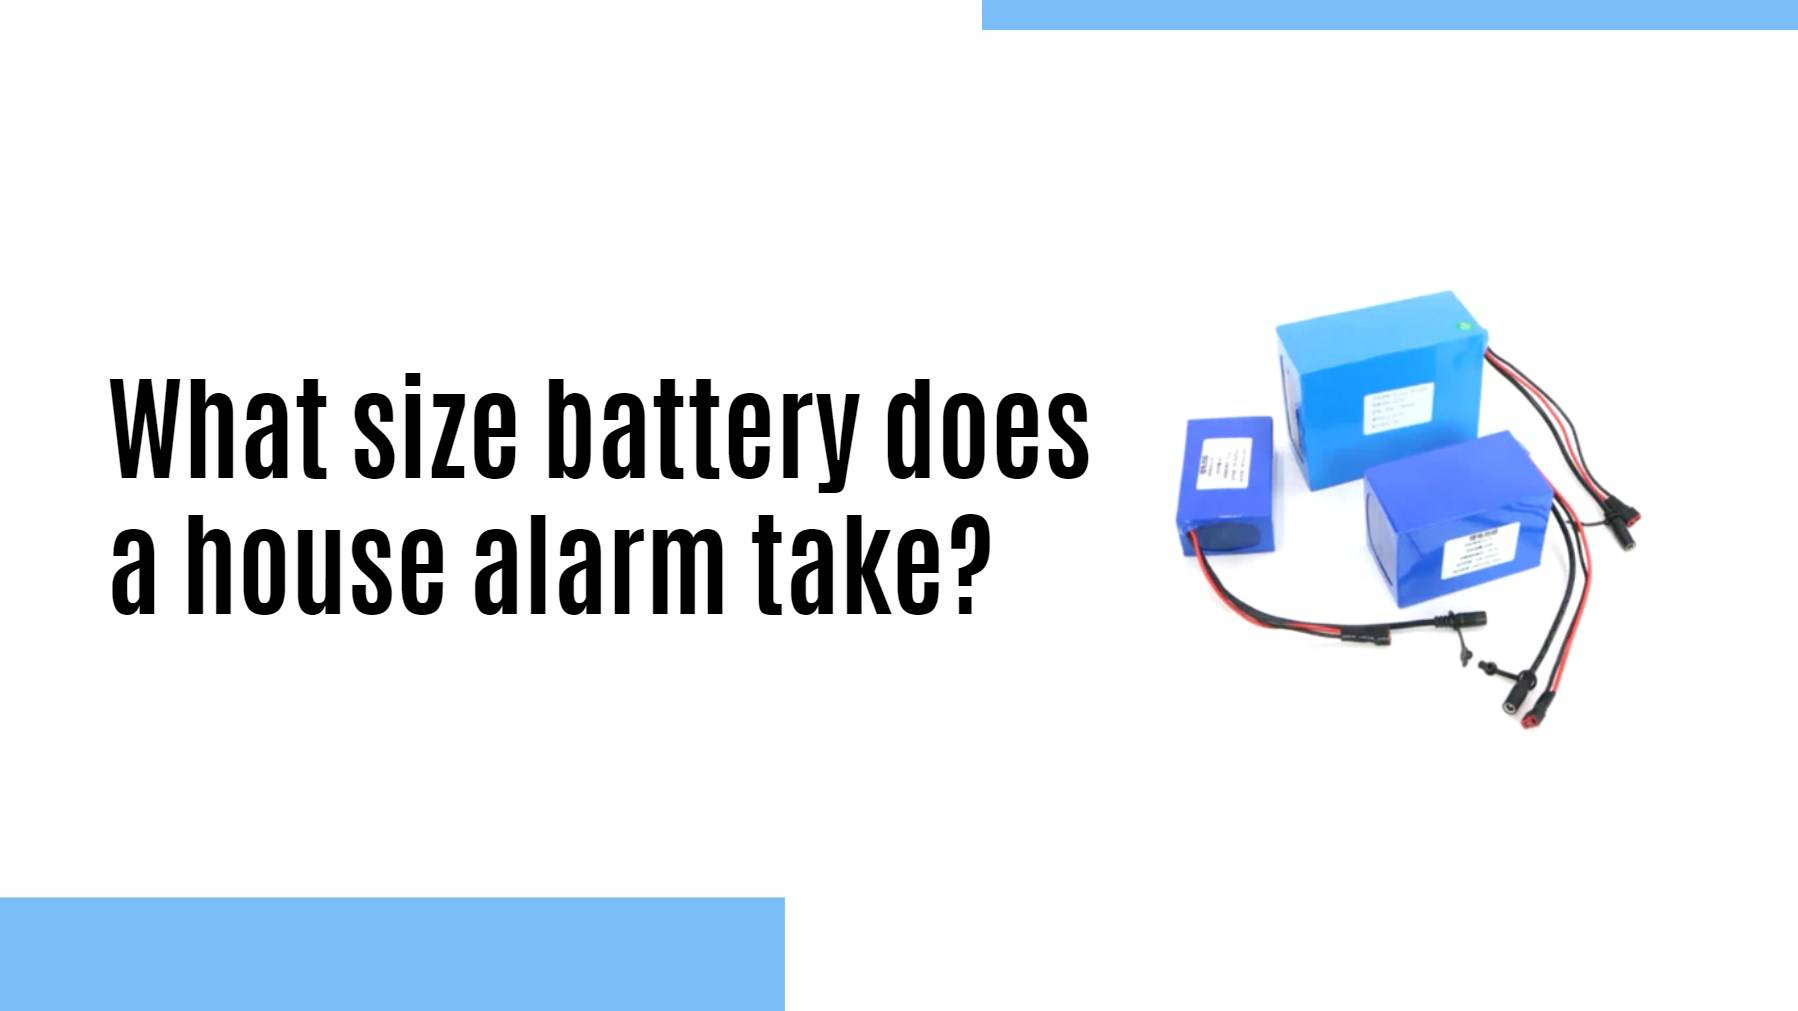 What size battery does a house alarm take?